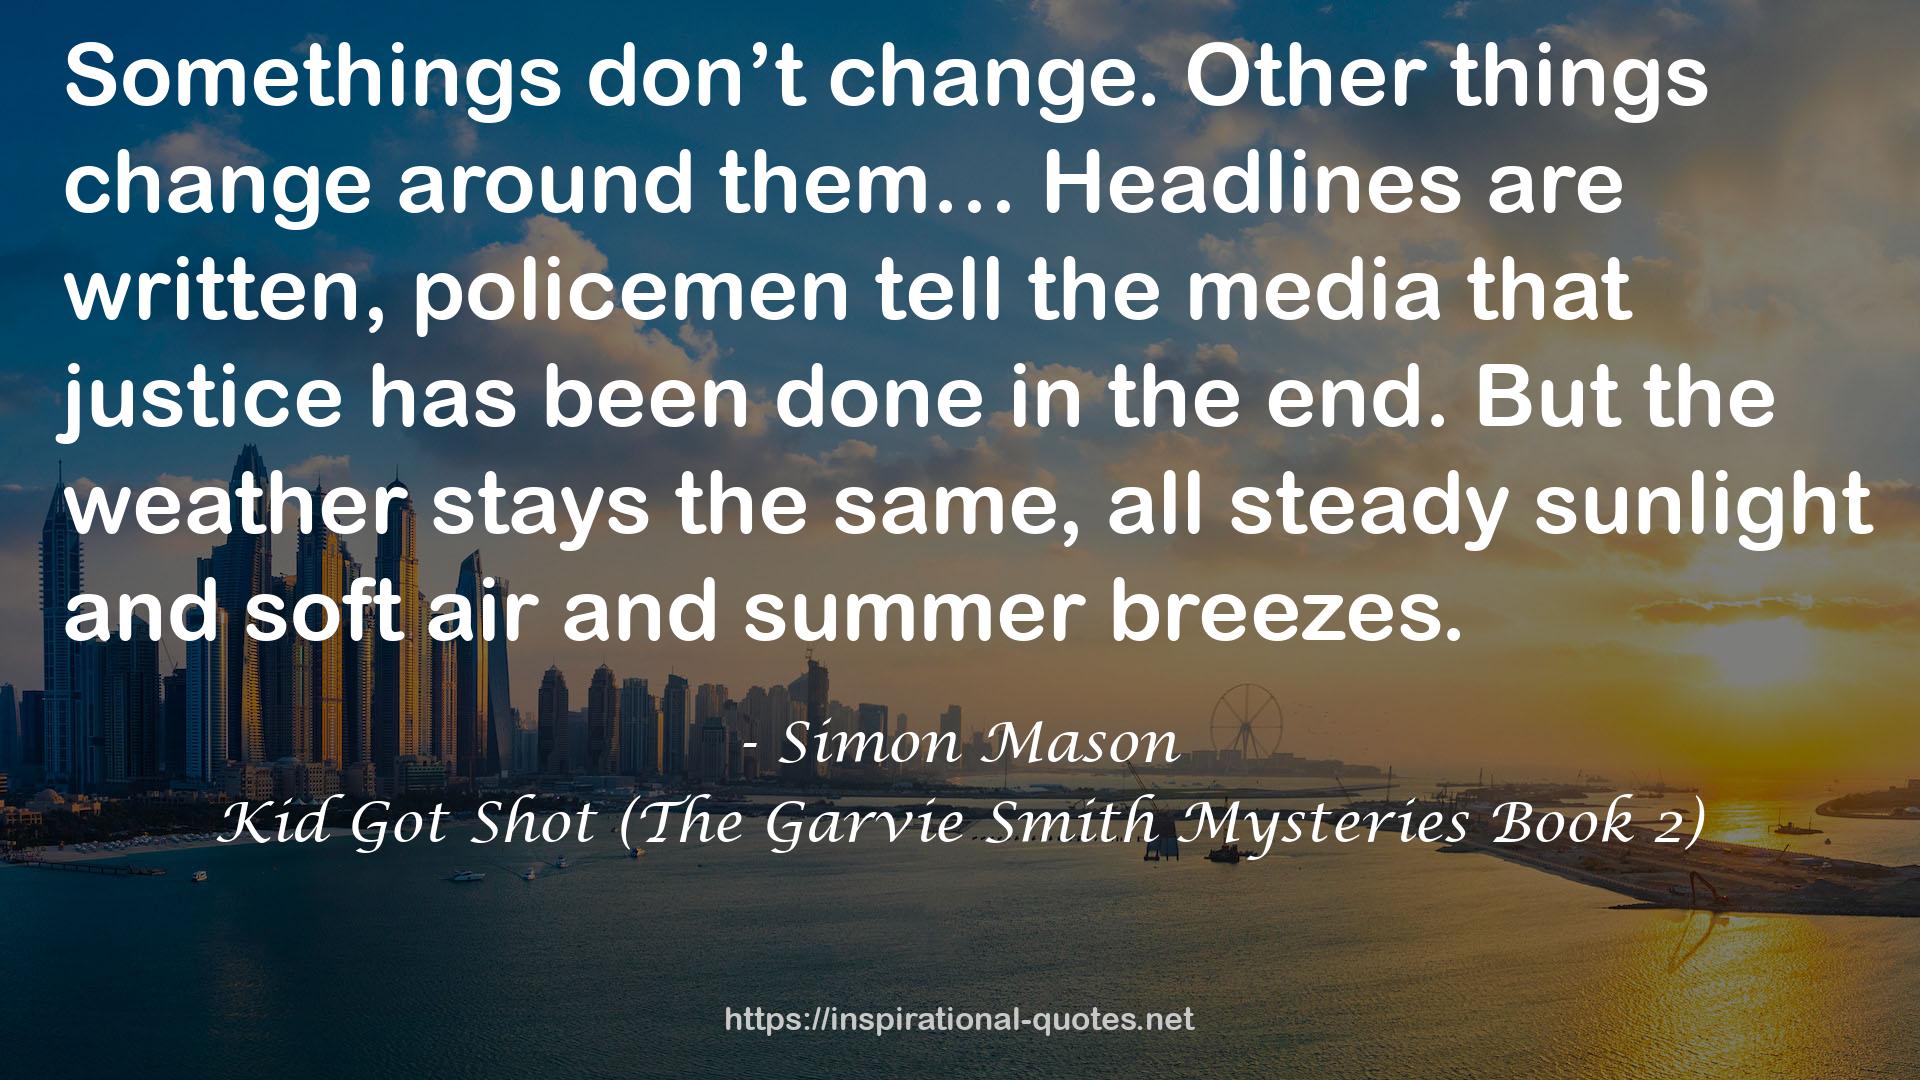 Kid Got Shot (The Garvie Smith Mysteries Book 2) QUOTES